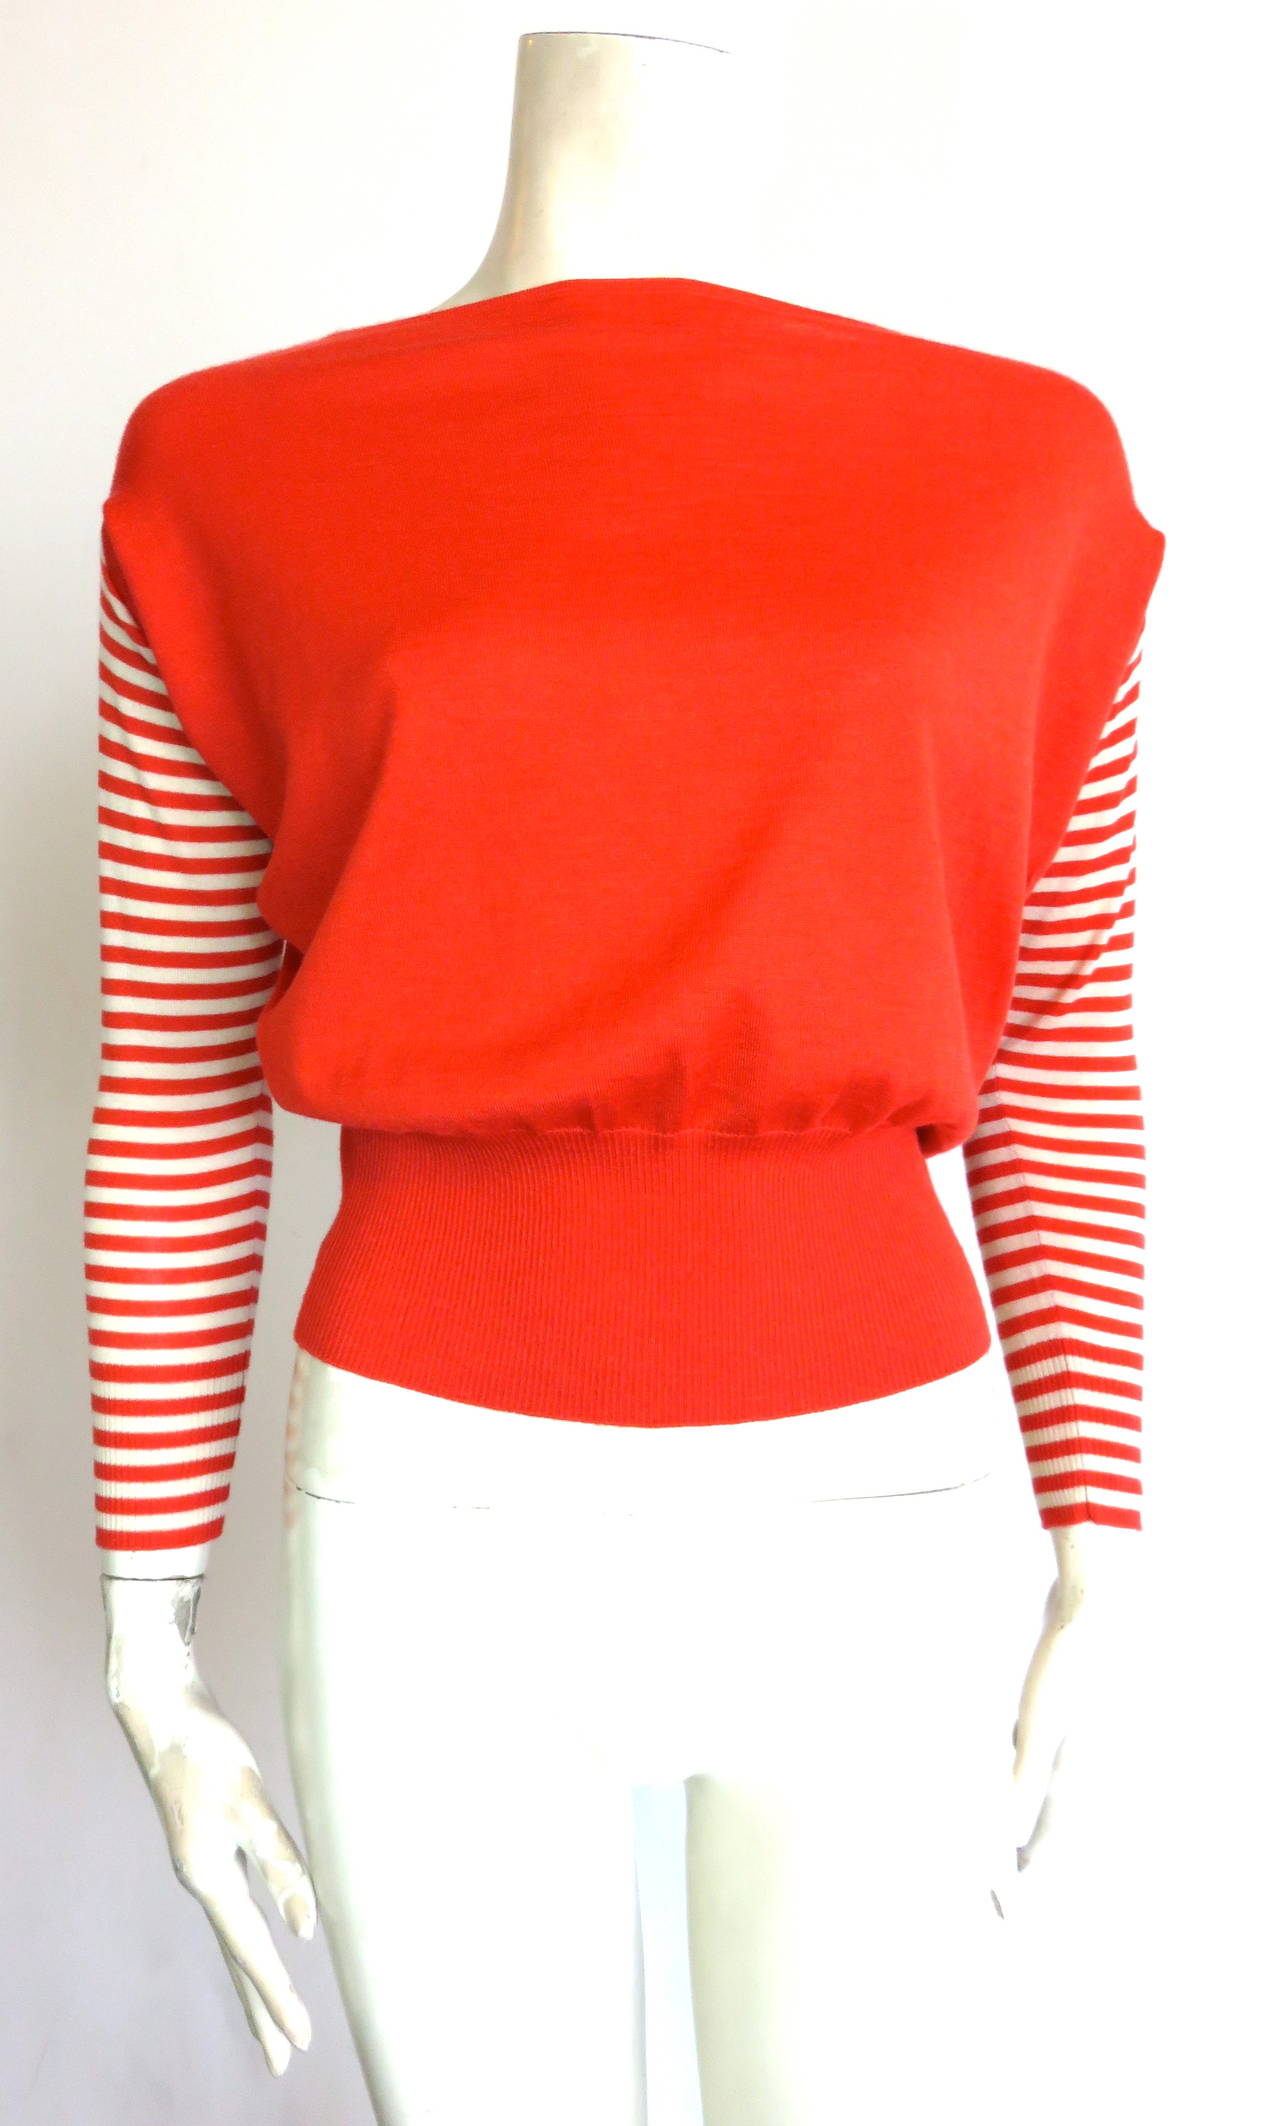 Never worn, HERMES PARIS by Martin Margiela cashmere & silk, knit sweater.

Luxuriously soft, light-weight hand-feel.

Boat-neckline opening with dropped shoulder, and fitted waist silhouette.

Signature Hermes orange color with novelty,